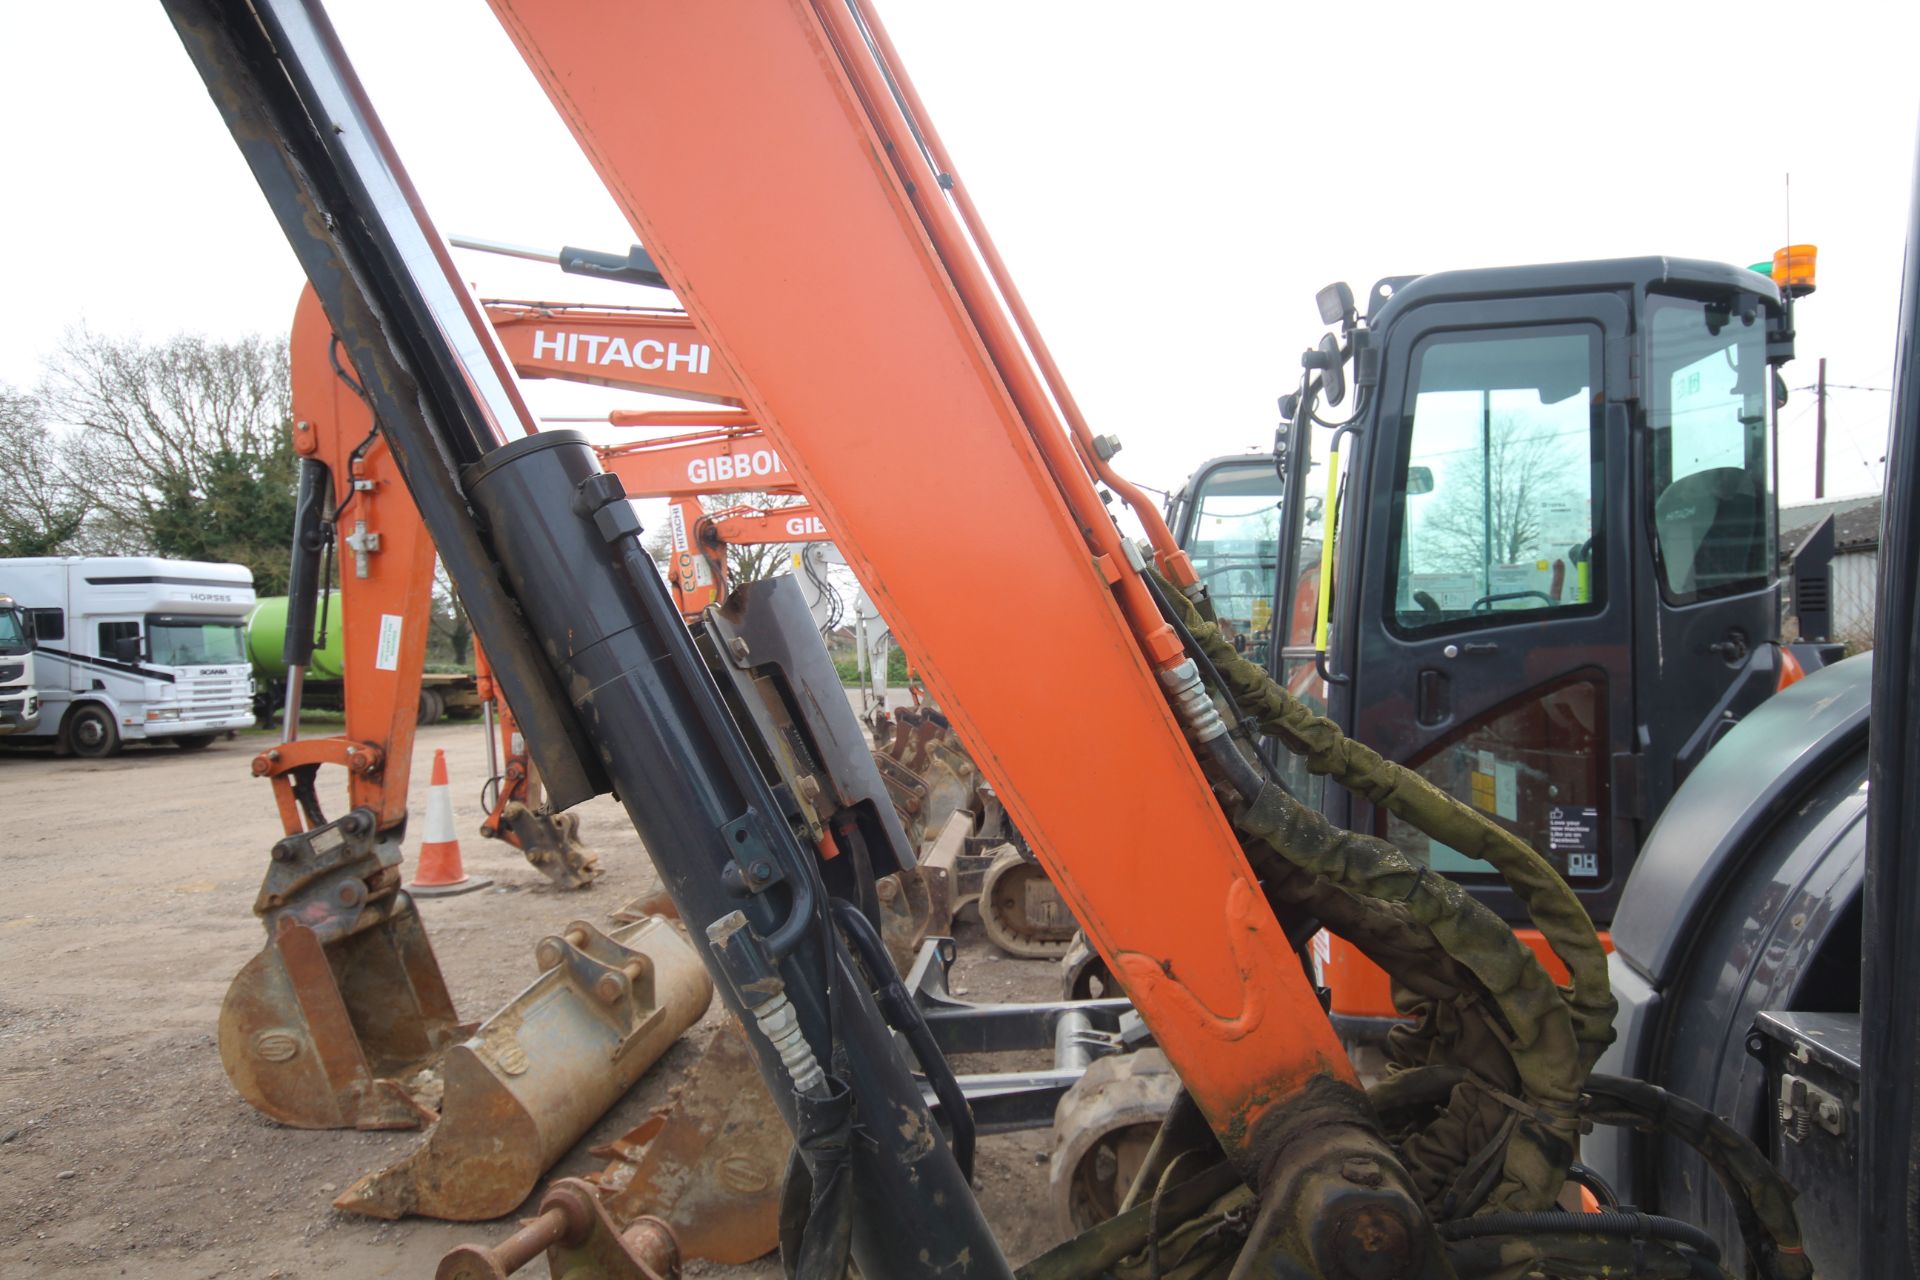 Hitachi ZX55U-5A CLR 5.5T rubber track excavator. 2018. 3,217 hours. Serial number HCMA - Image 39 of 85